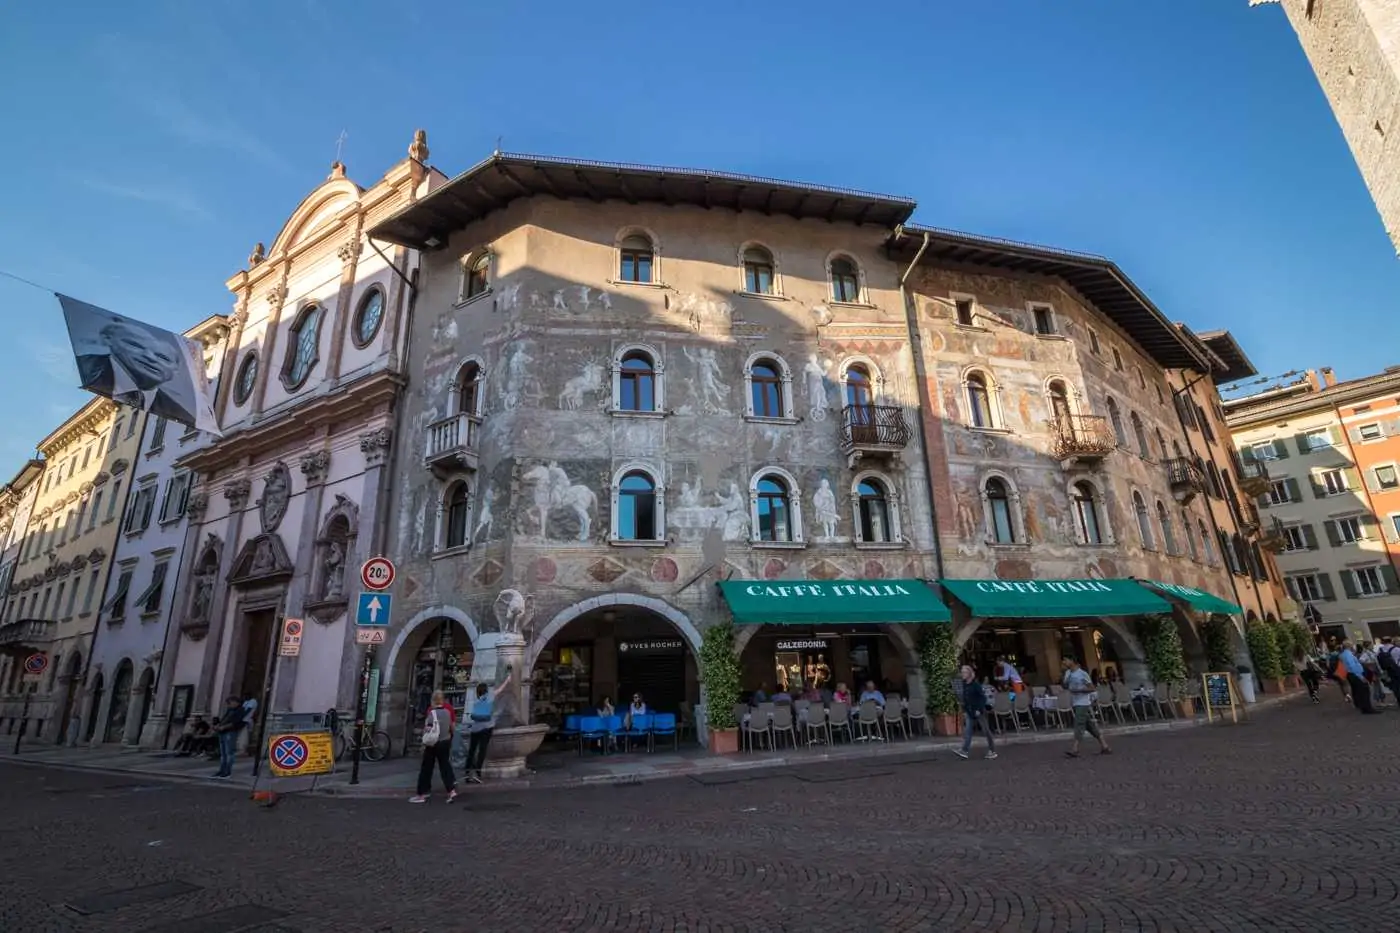 painted frescoes on buildings in piazza duomo trento